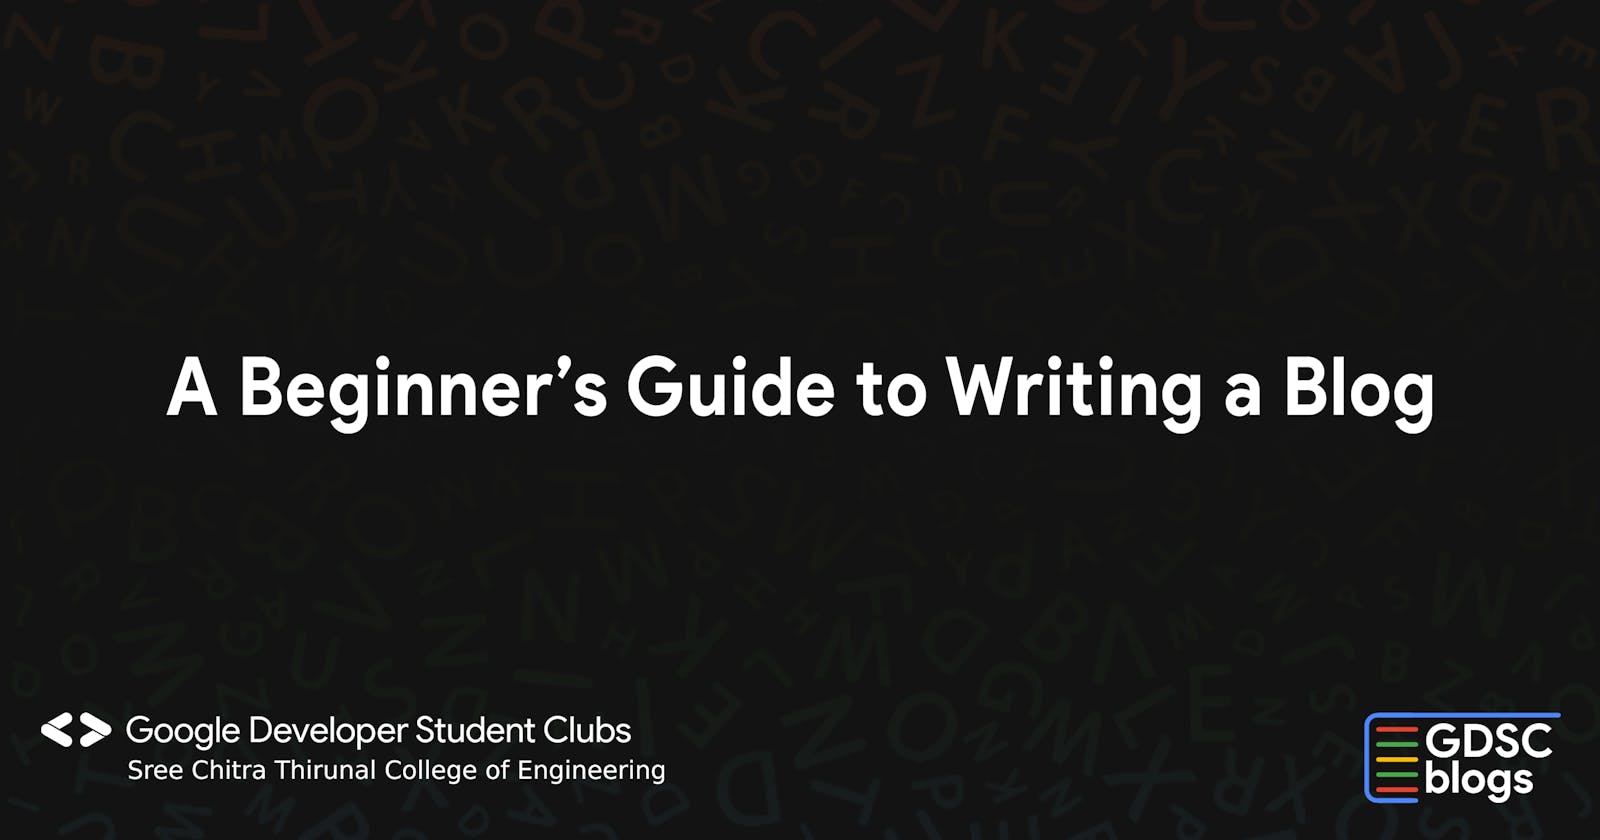 A Beginner’s Guide To Writing a Blog